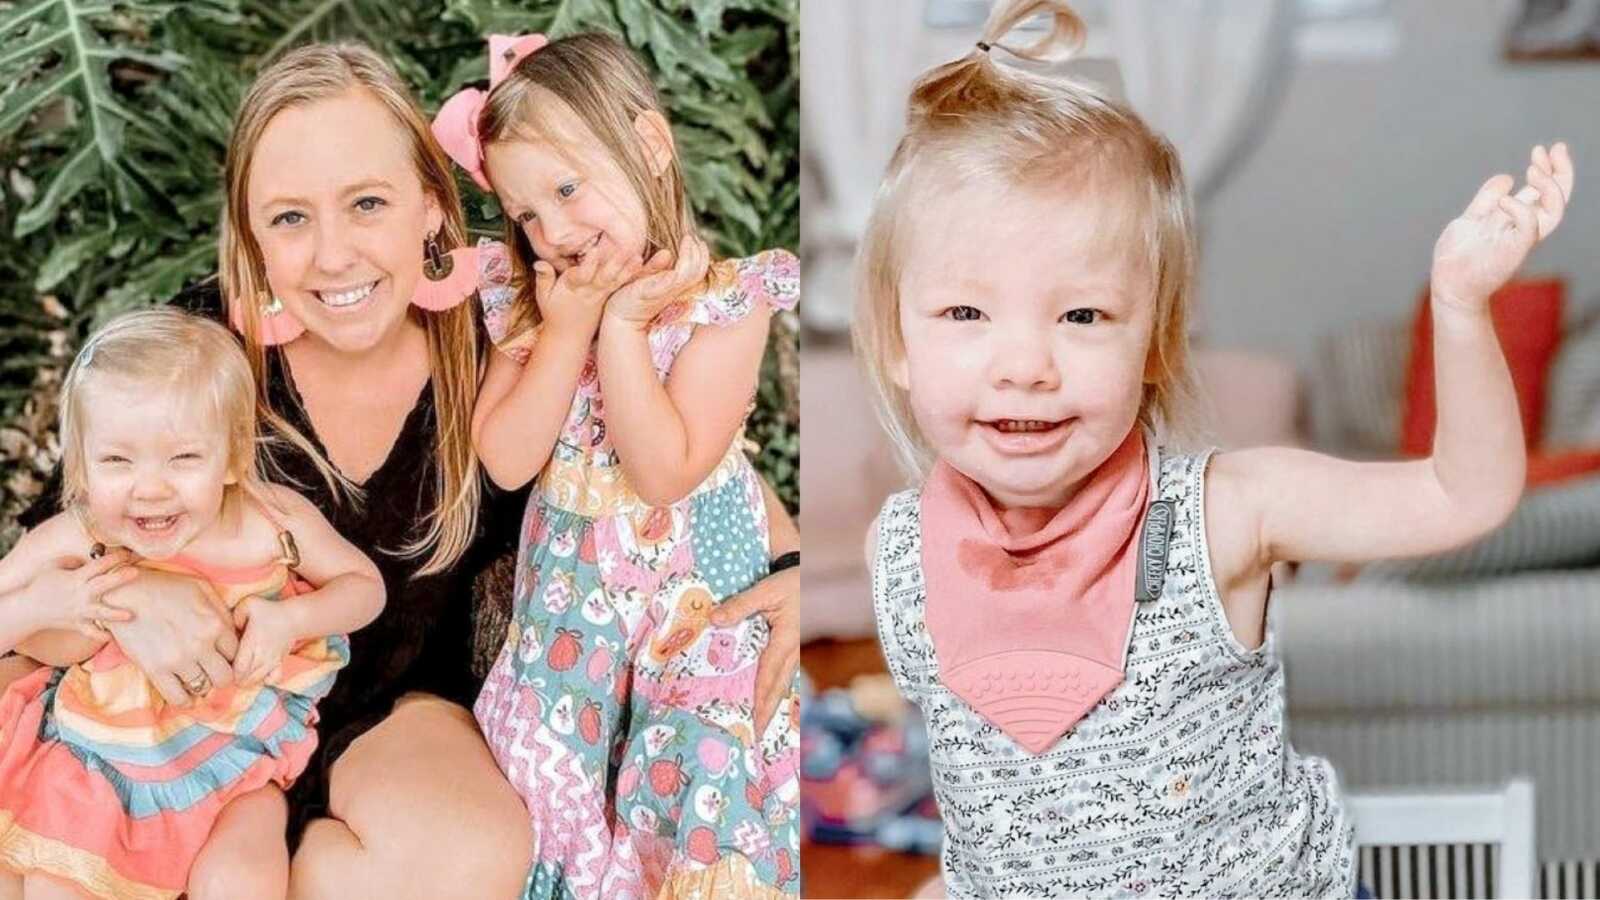 Mom on the left takes a photo with her two daughters, on the right mom takes a photo of her youngest daughter with Coffin-Siris Syndrome